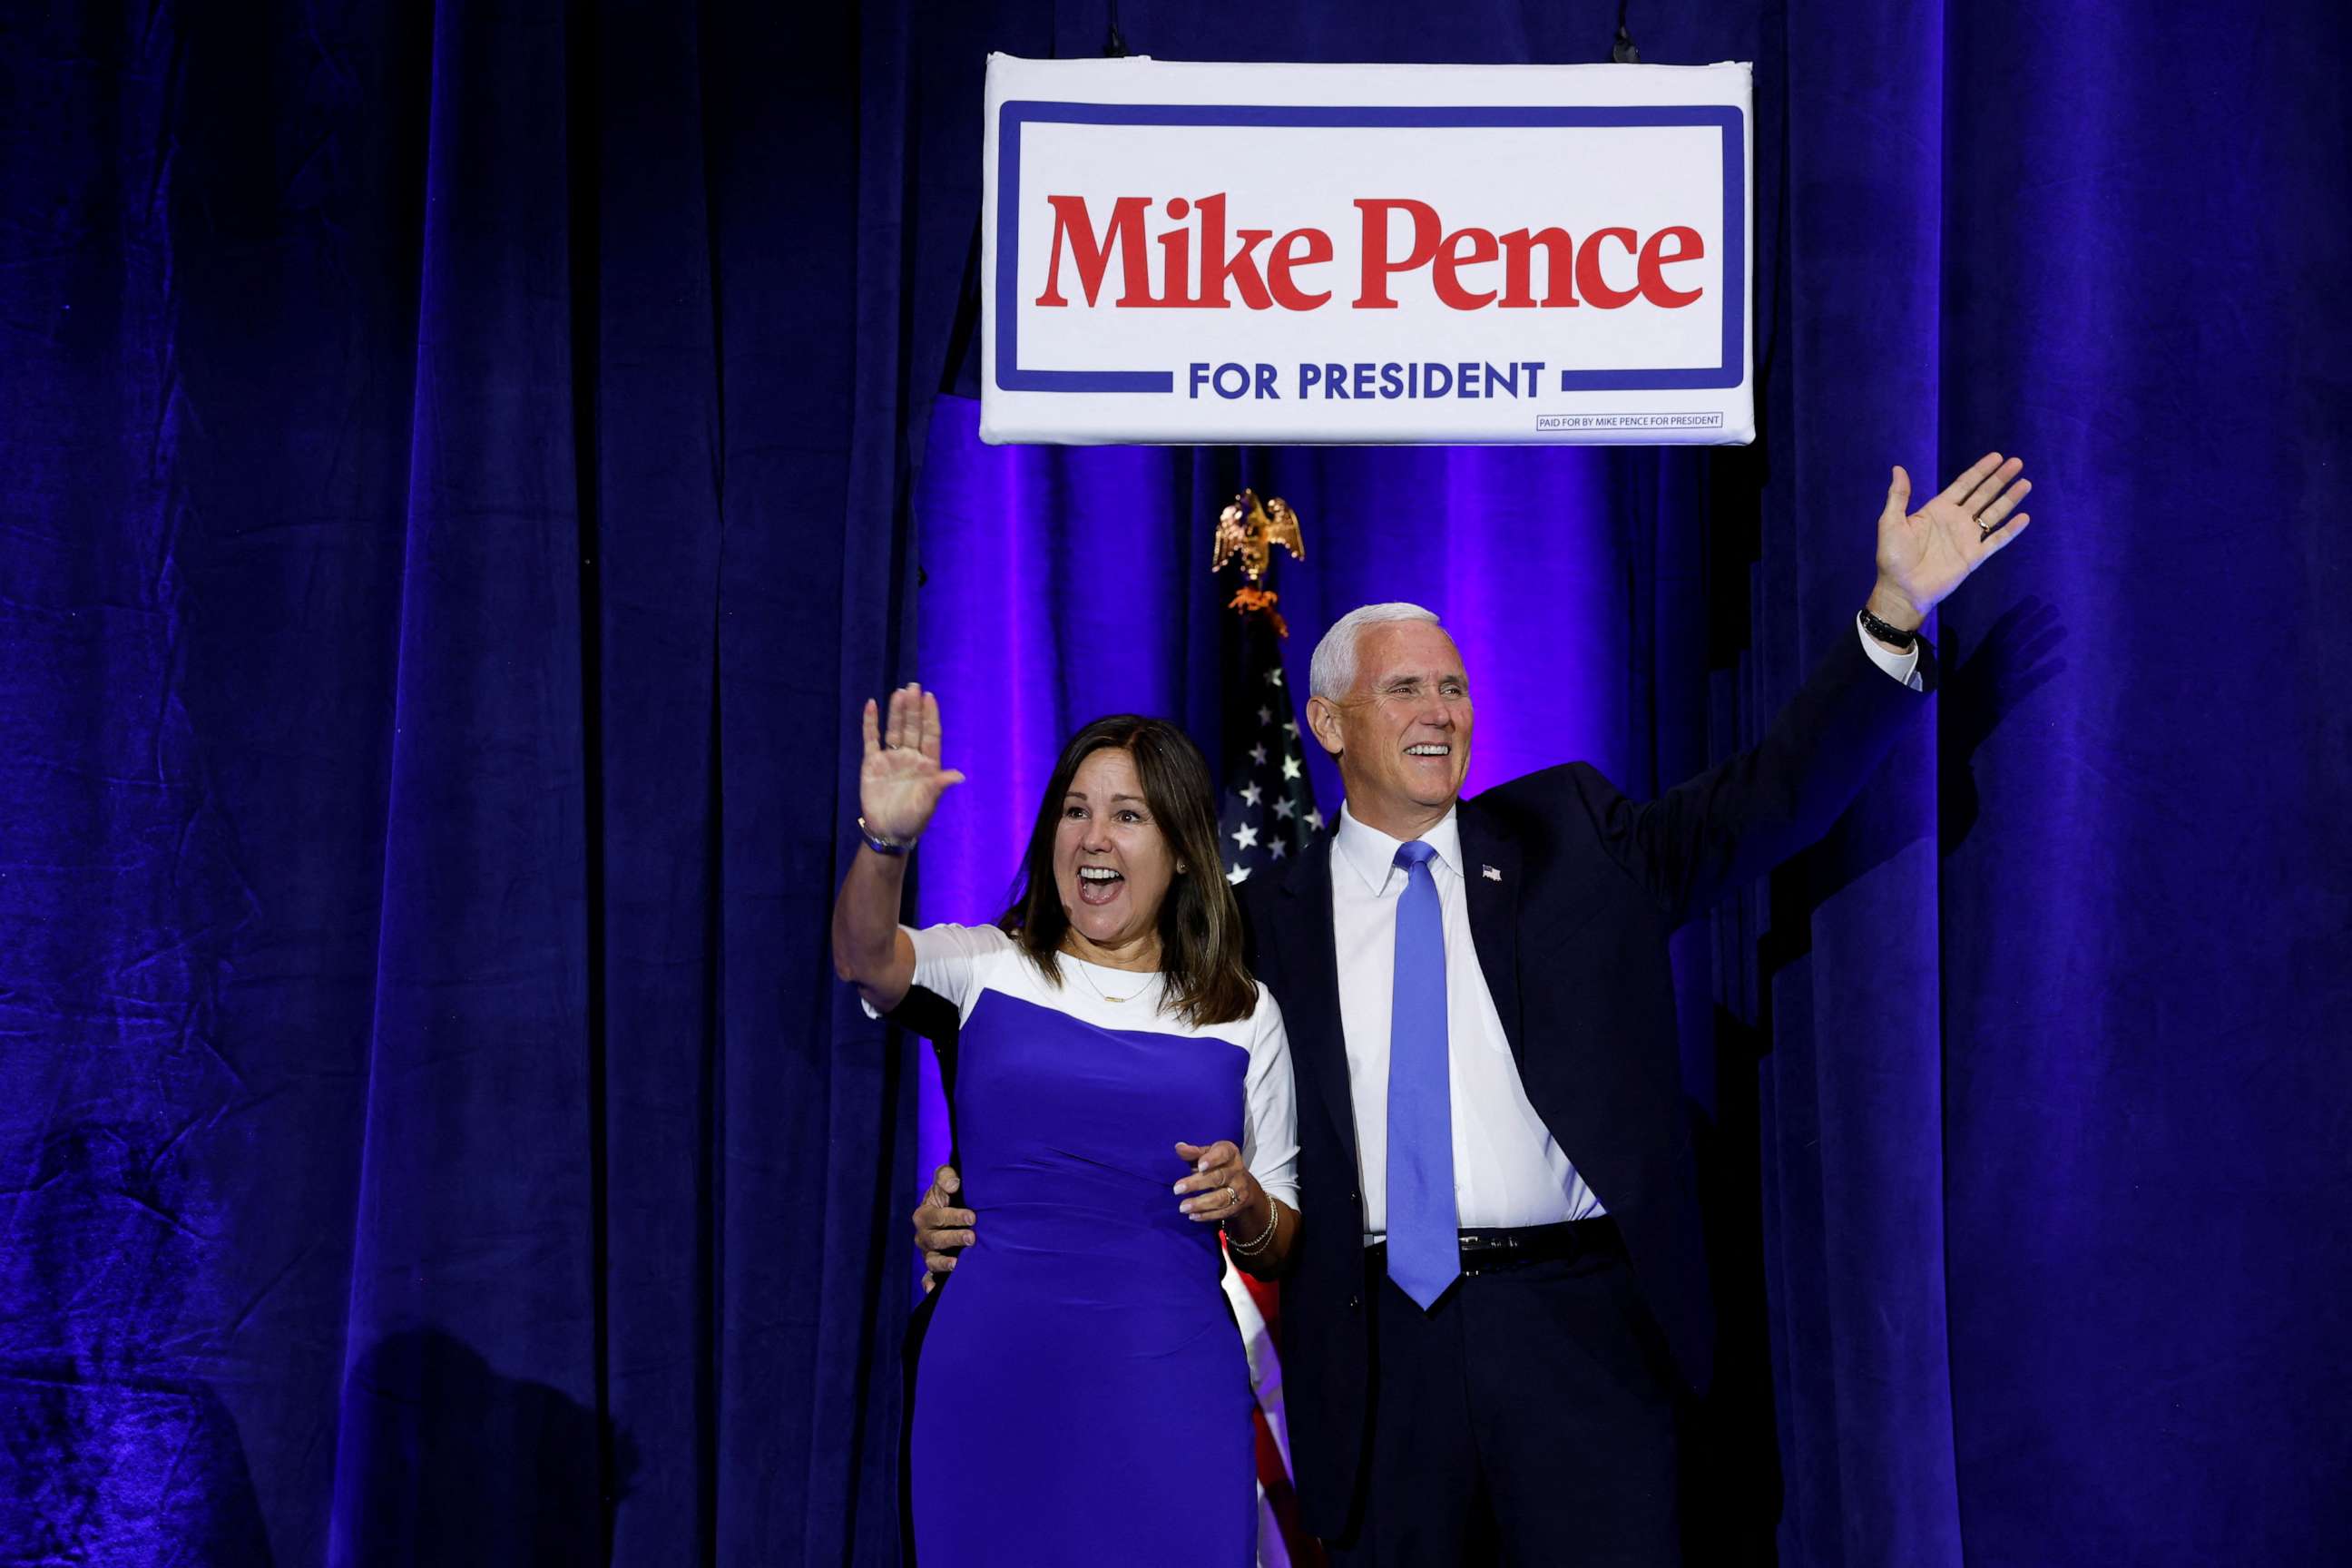 PHOTO: Former Vice President Mike Pence arrives with his wife Karen to make a U.S. presidential campaign kickoff announcement about his race for the 2024 Republican presidential nomination Ankeny, Iowa, June 7, 2023.